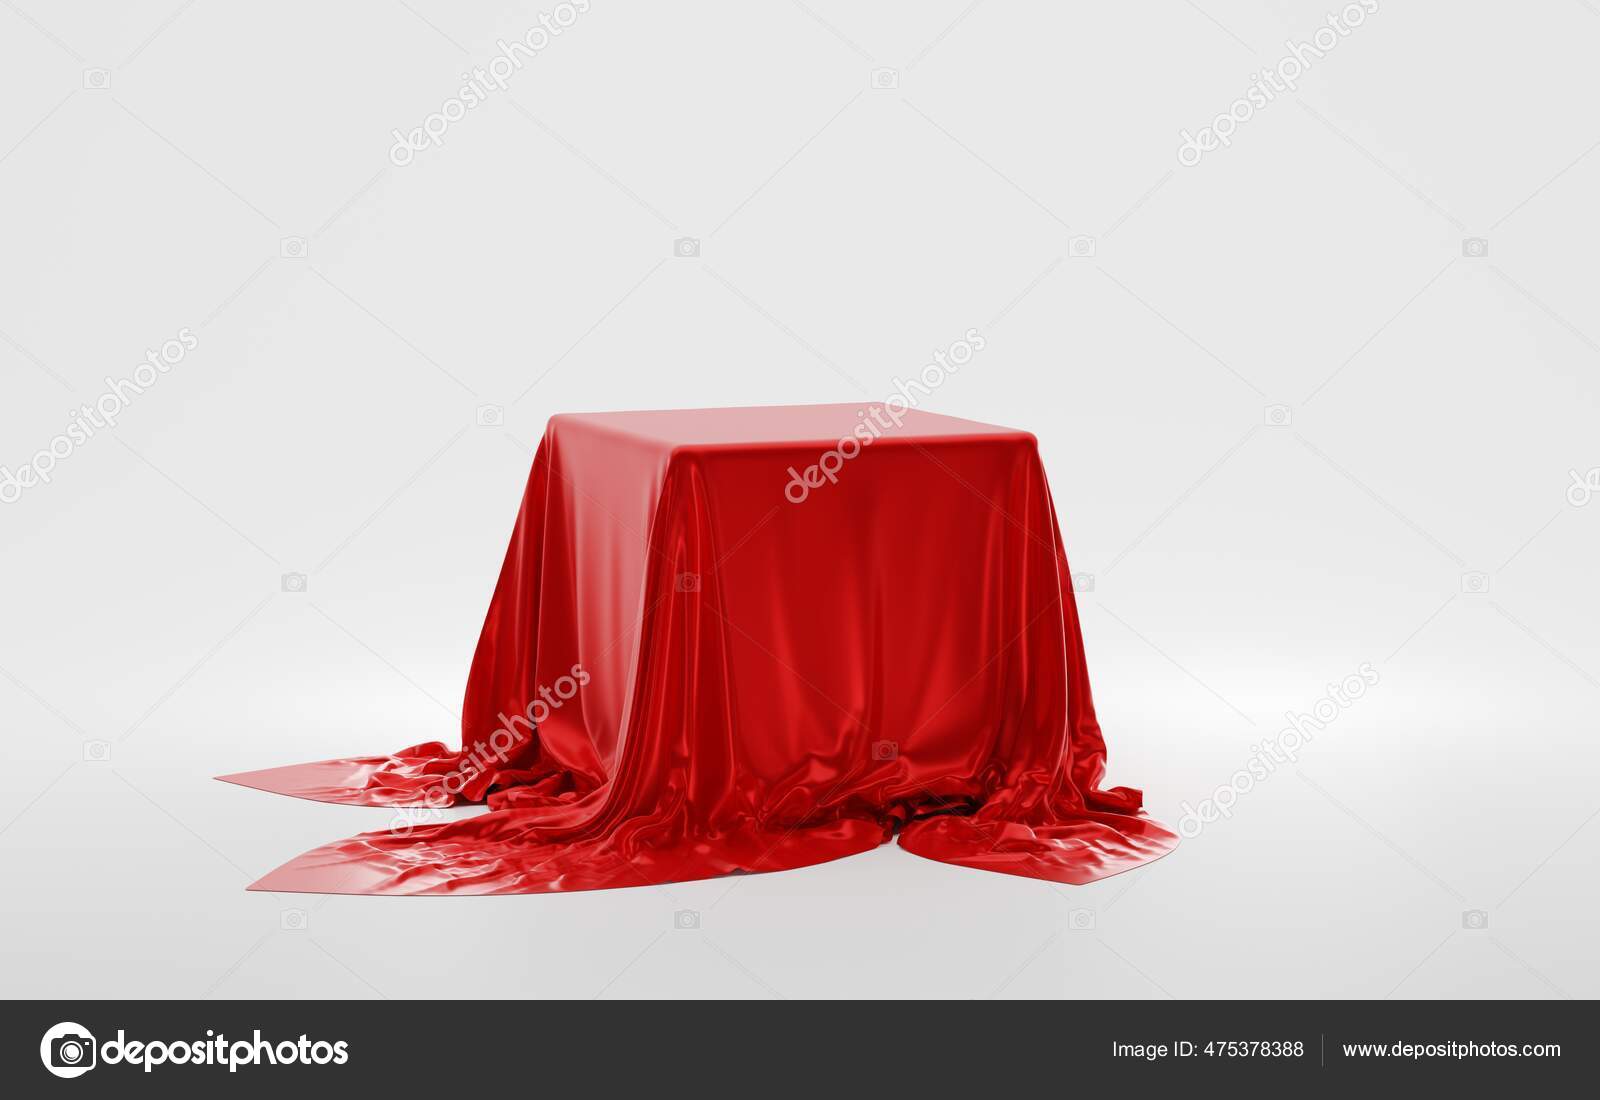 Cube or box covered with red silk cloth isolated on white background.  Secret gift, hidden under